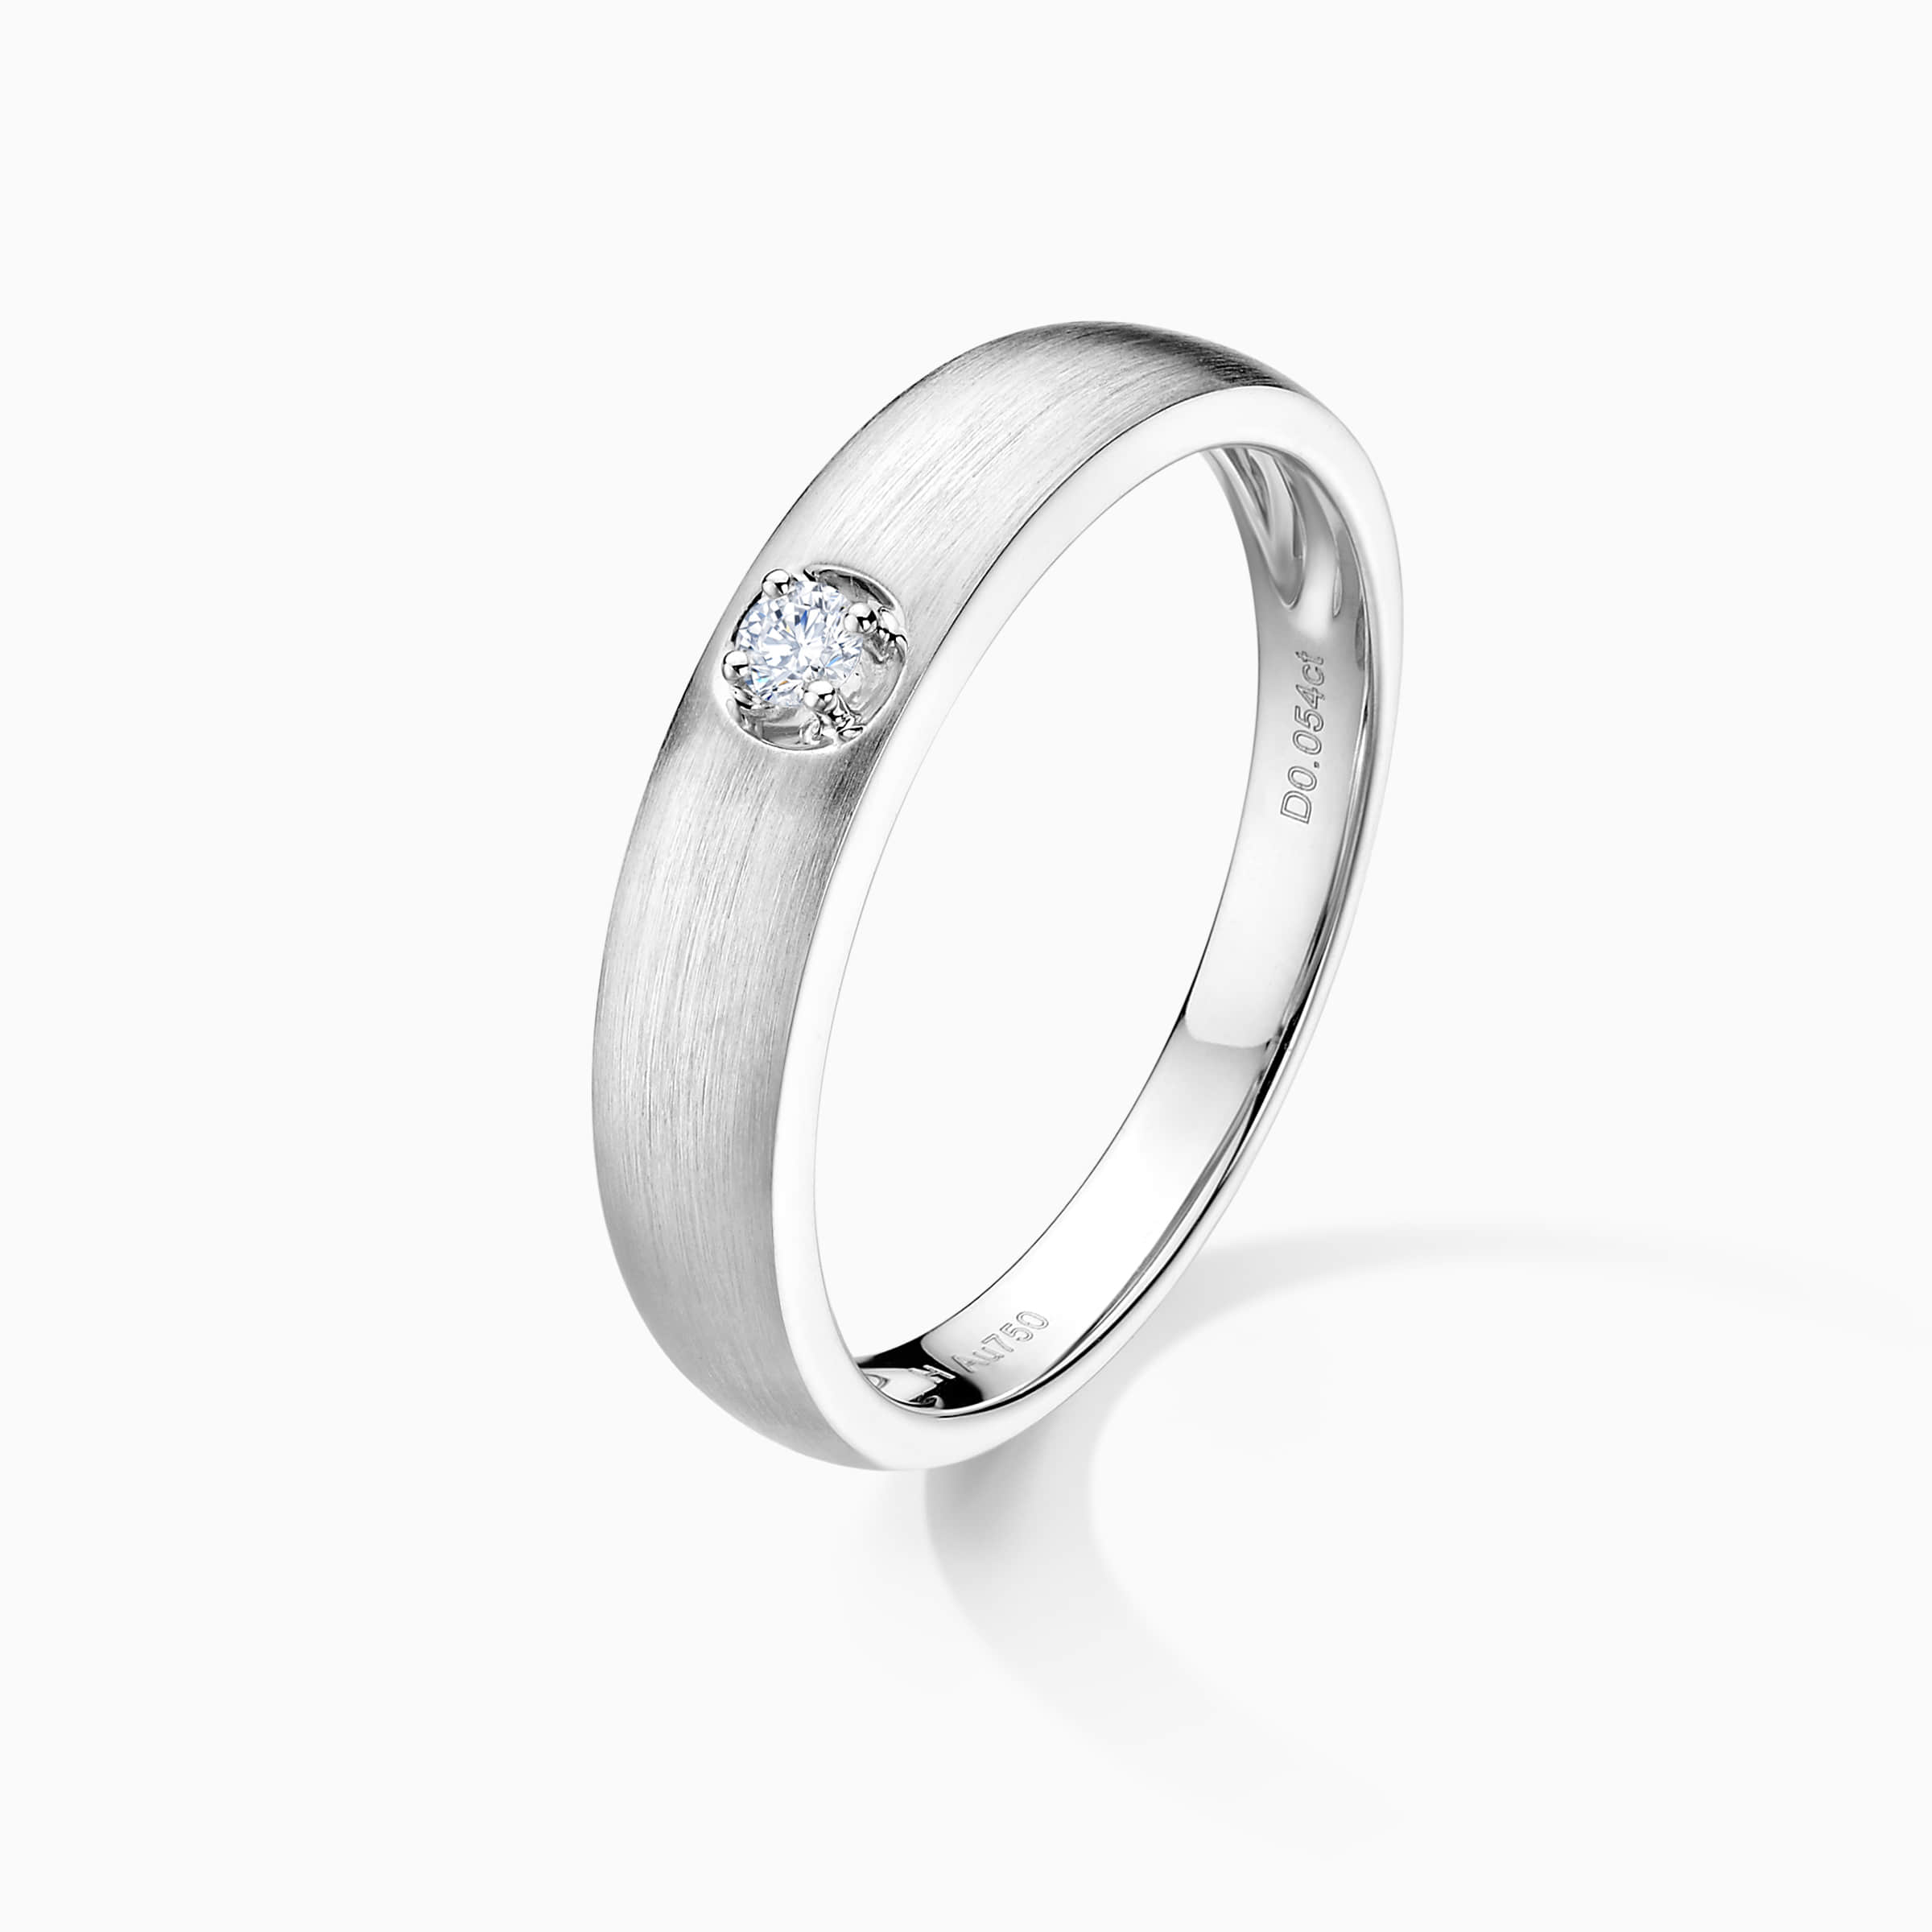 Darry Ring cool wedding ring for man side view